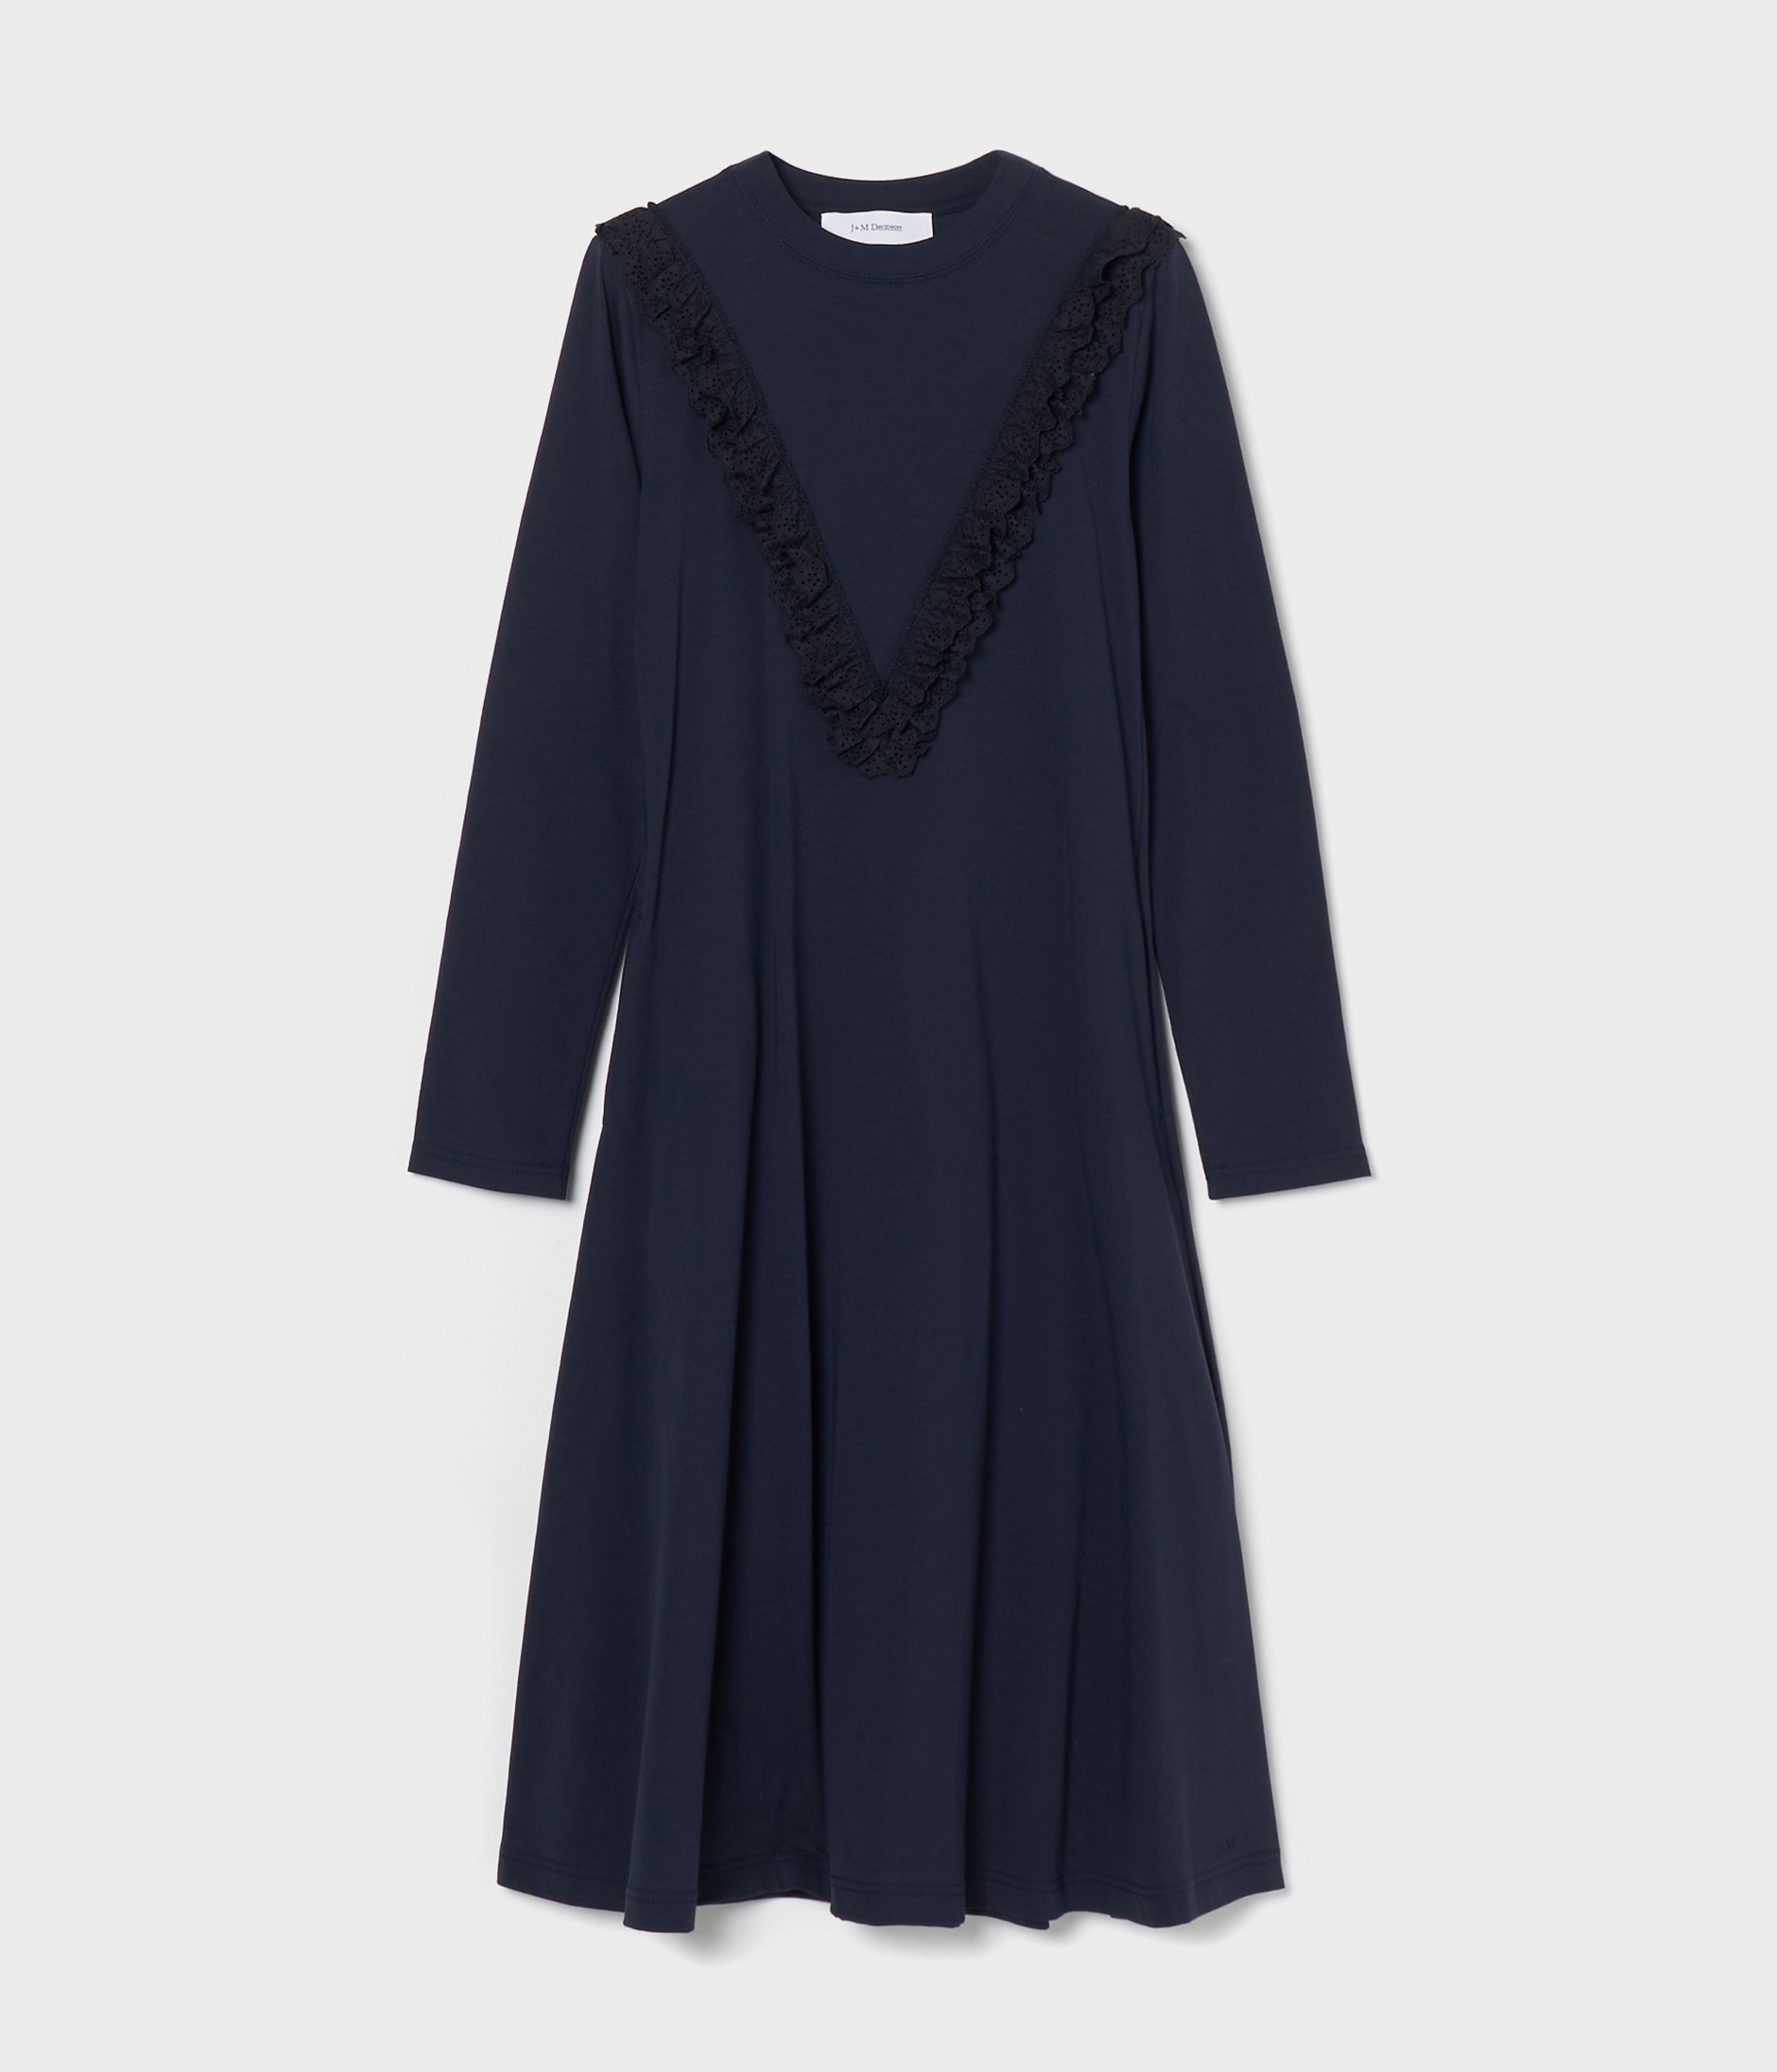 BRODERIE ANGLAISE JERSEY DRESS